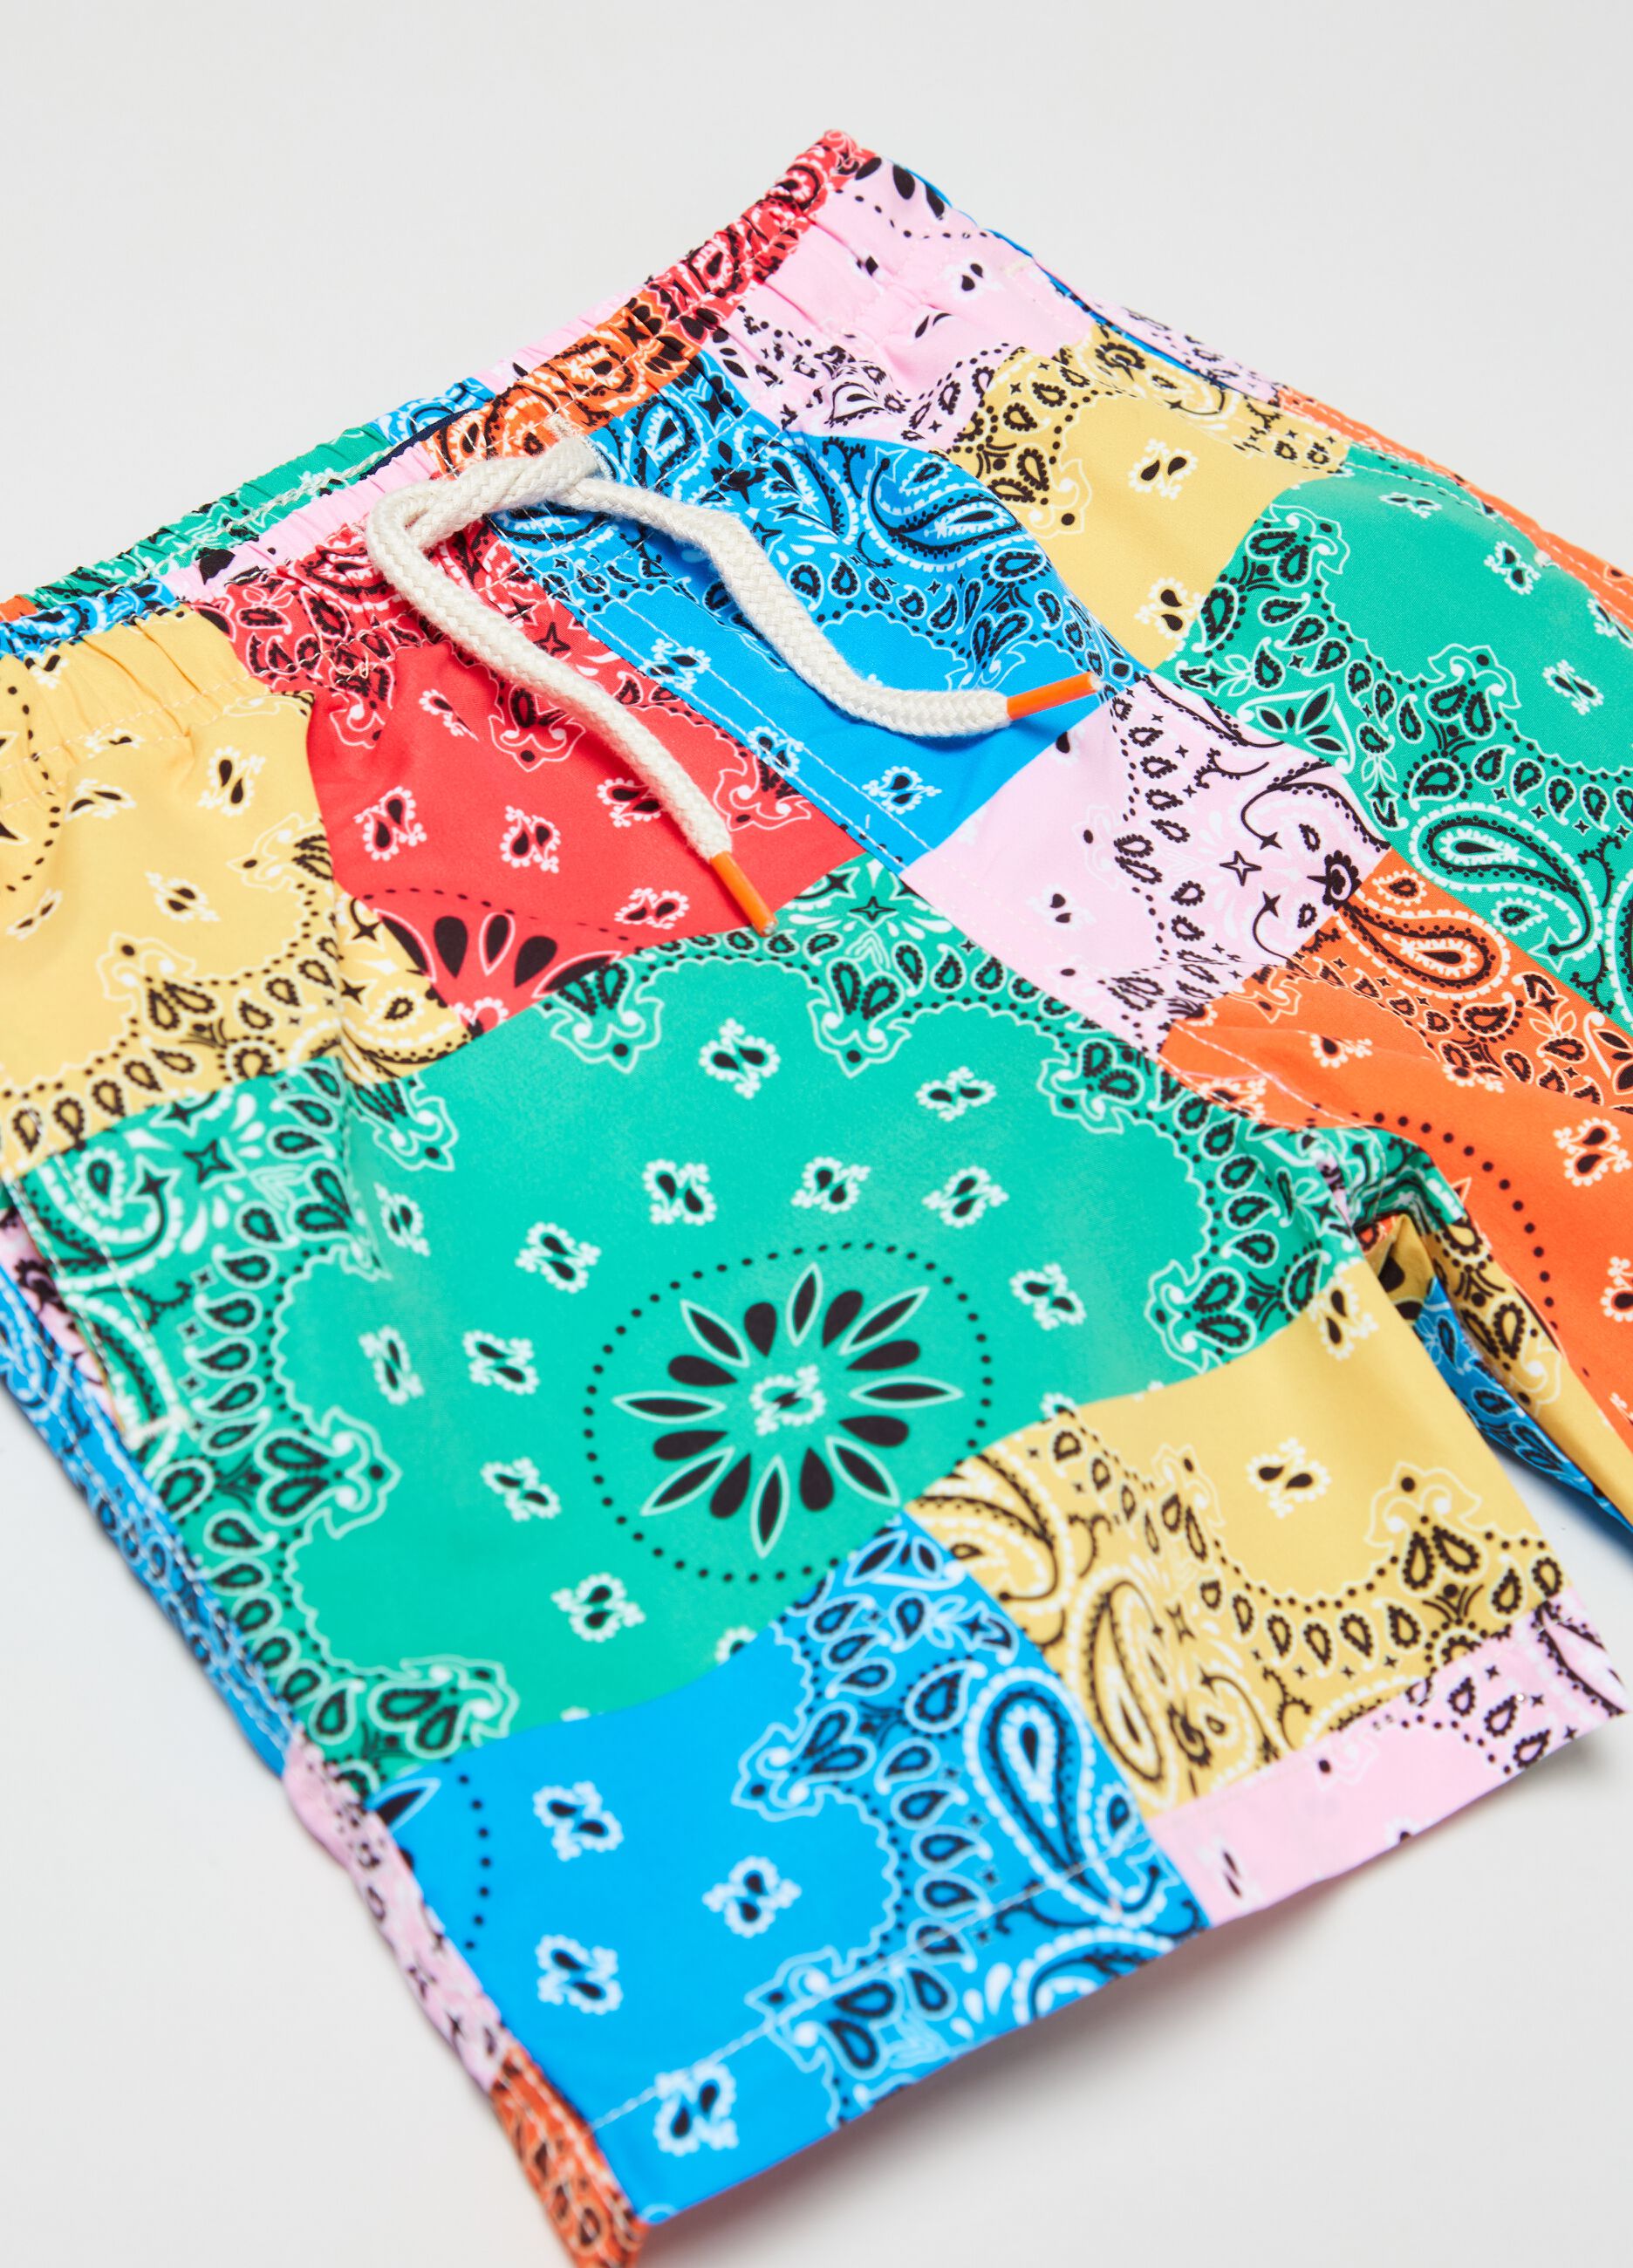 Swimming trunks with paisley print